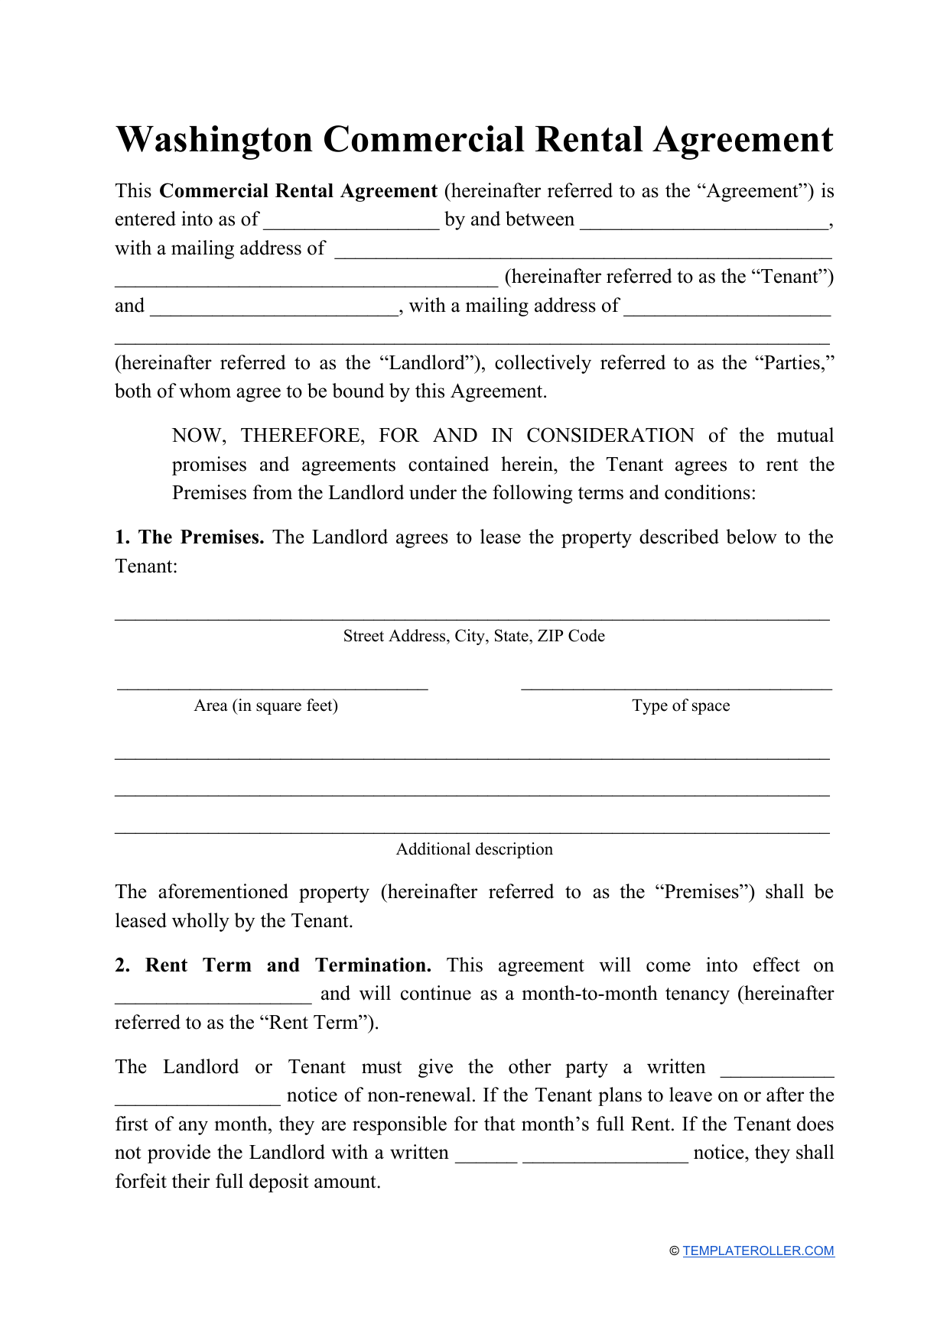 Commercial Rental Agreement Template - Washington, Page 1